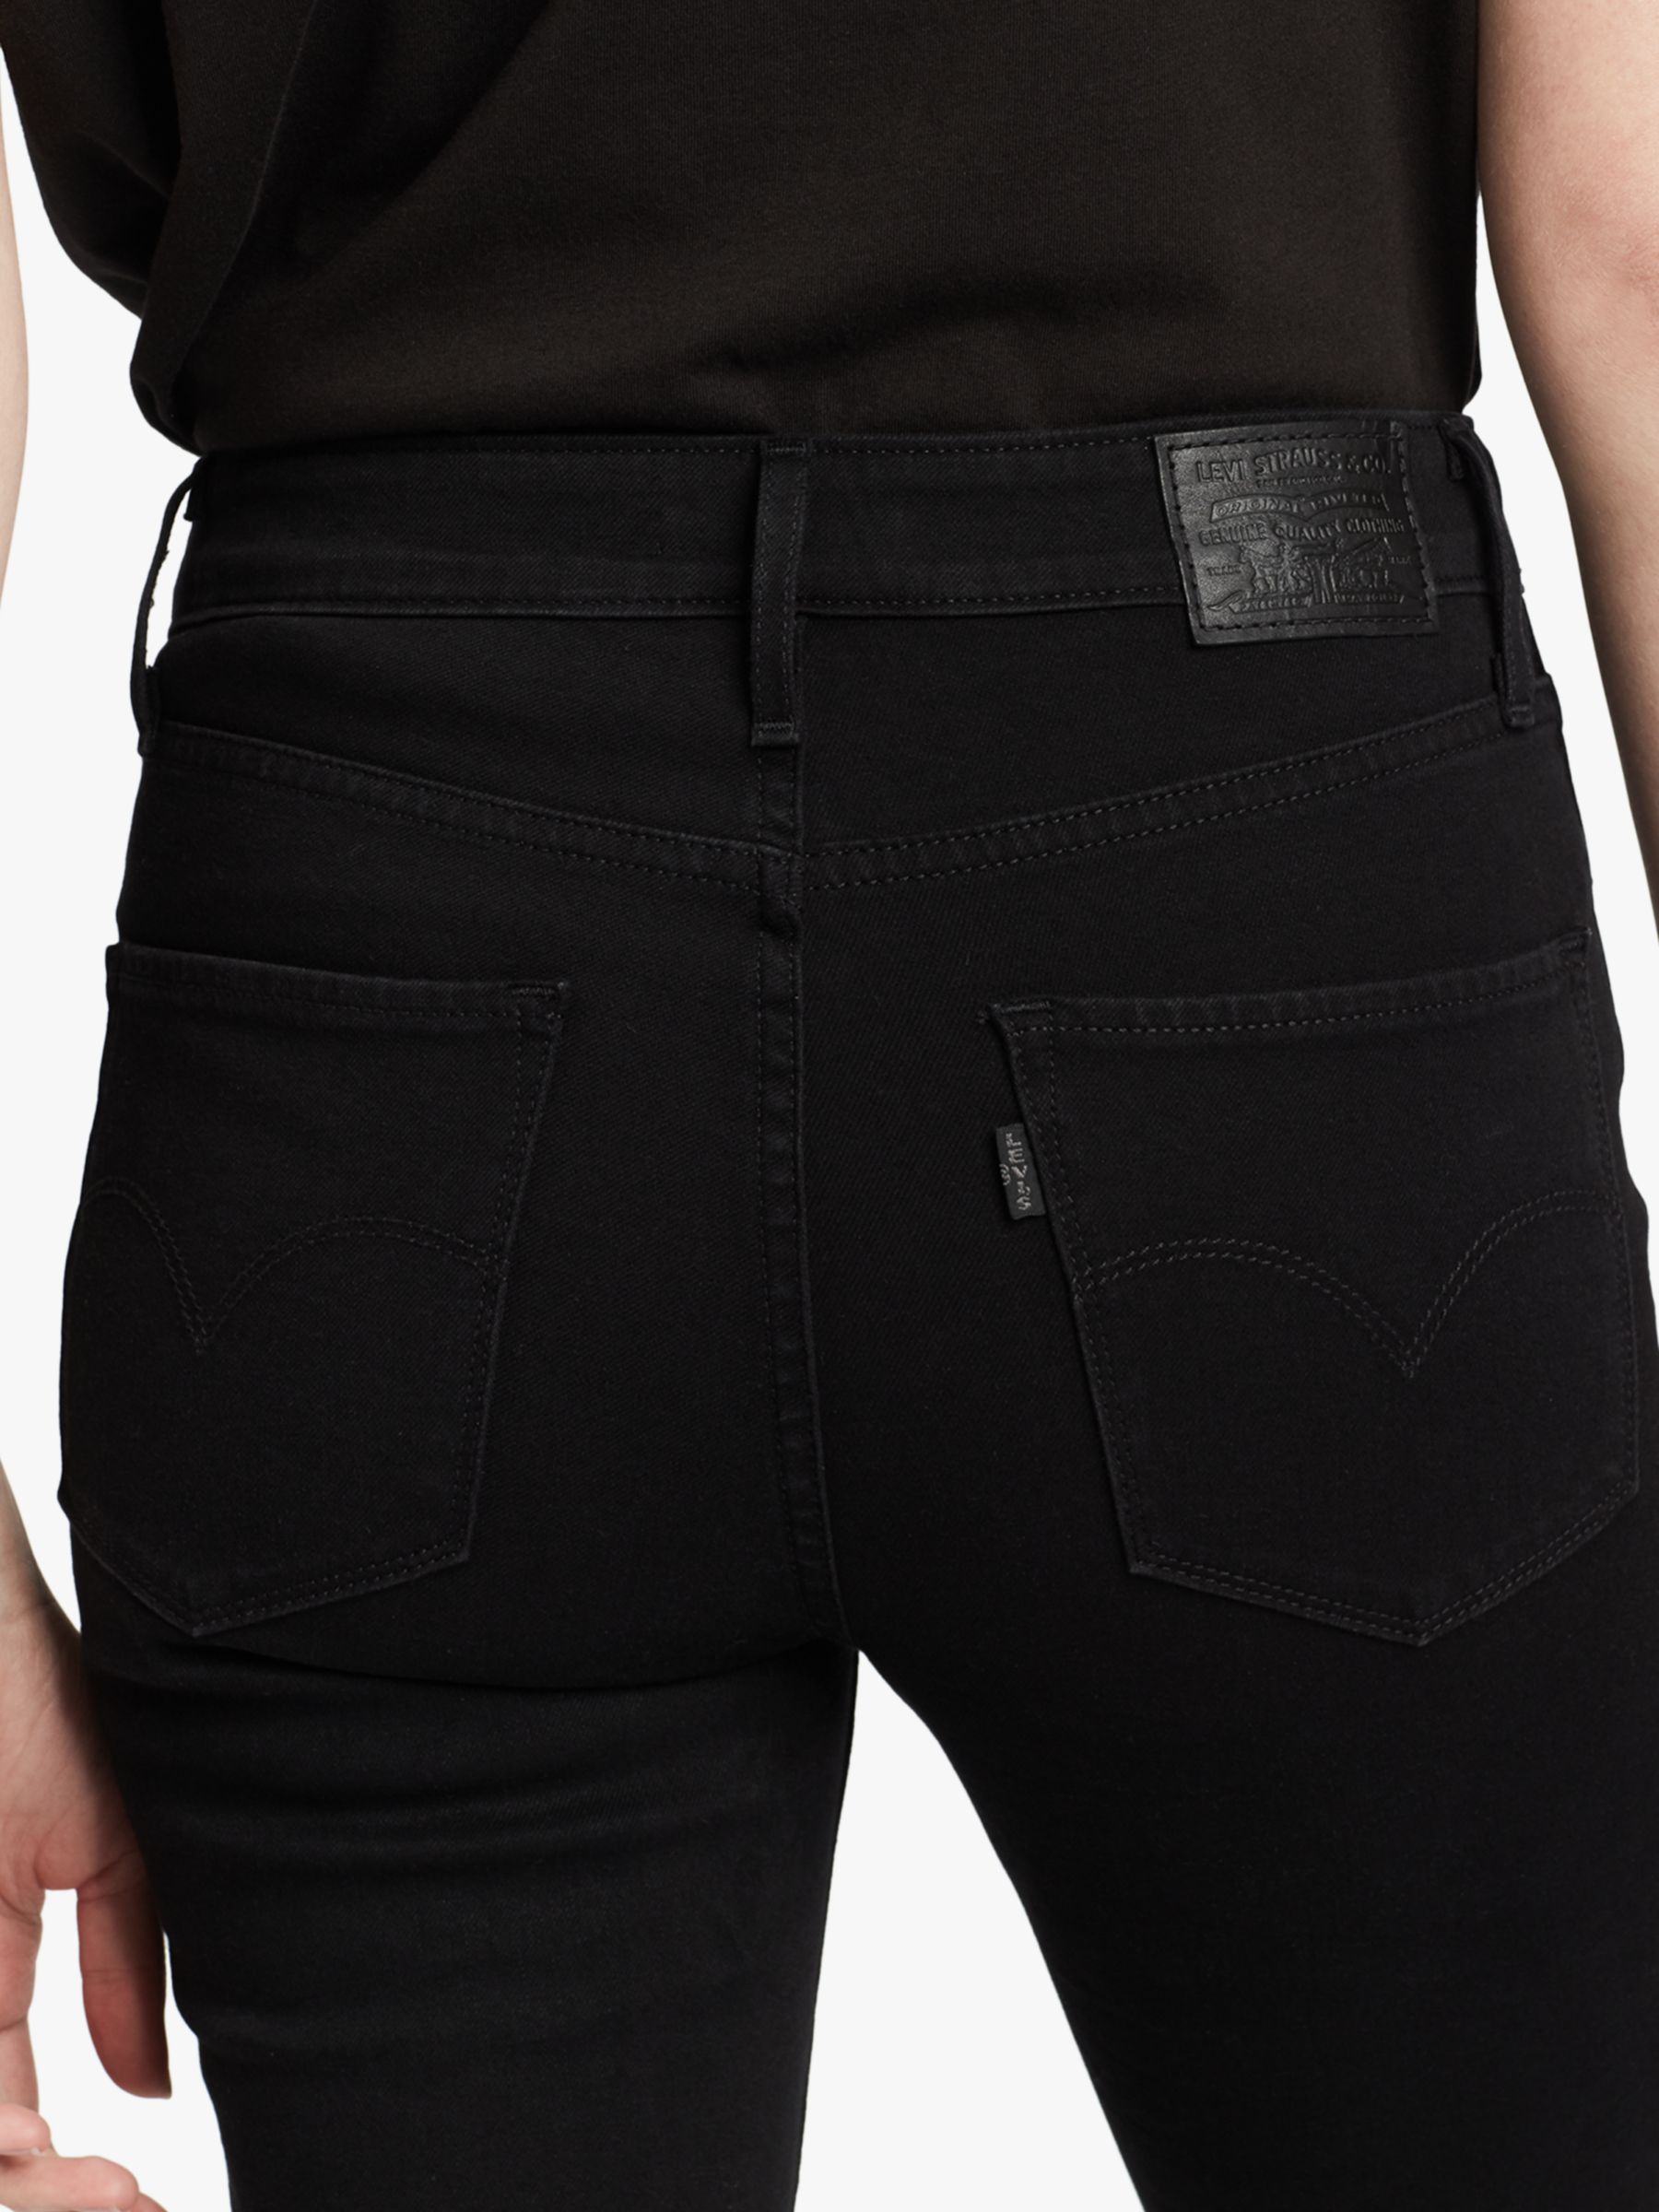 Levis 721 High Rise Skinny Jeans Black At John Lewis And Partners 9714